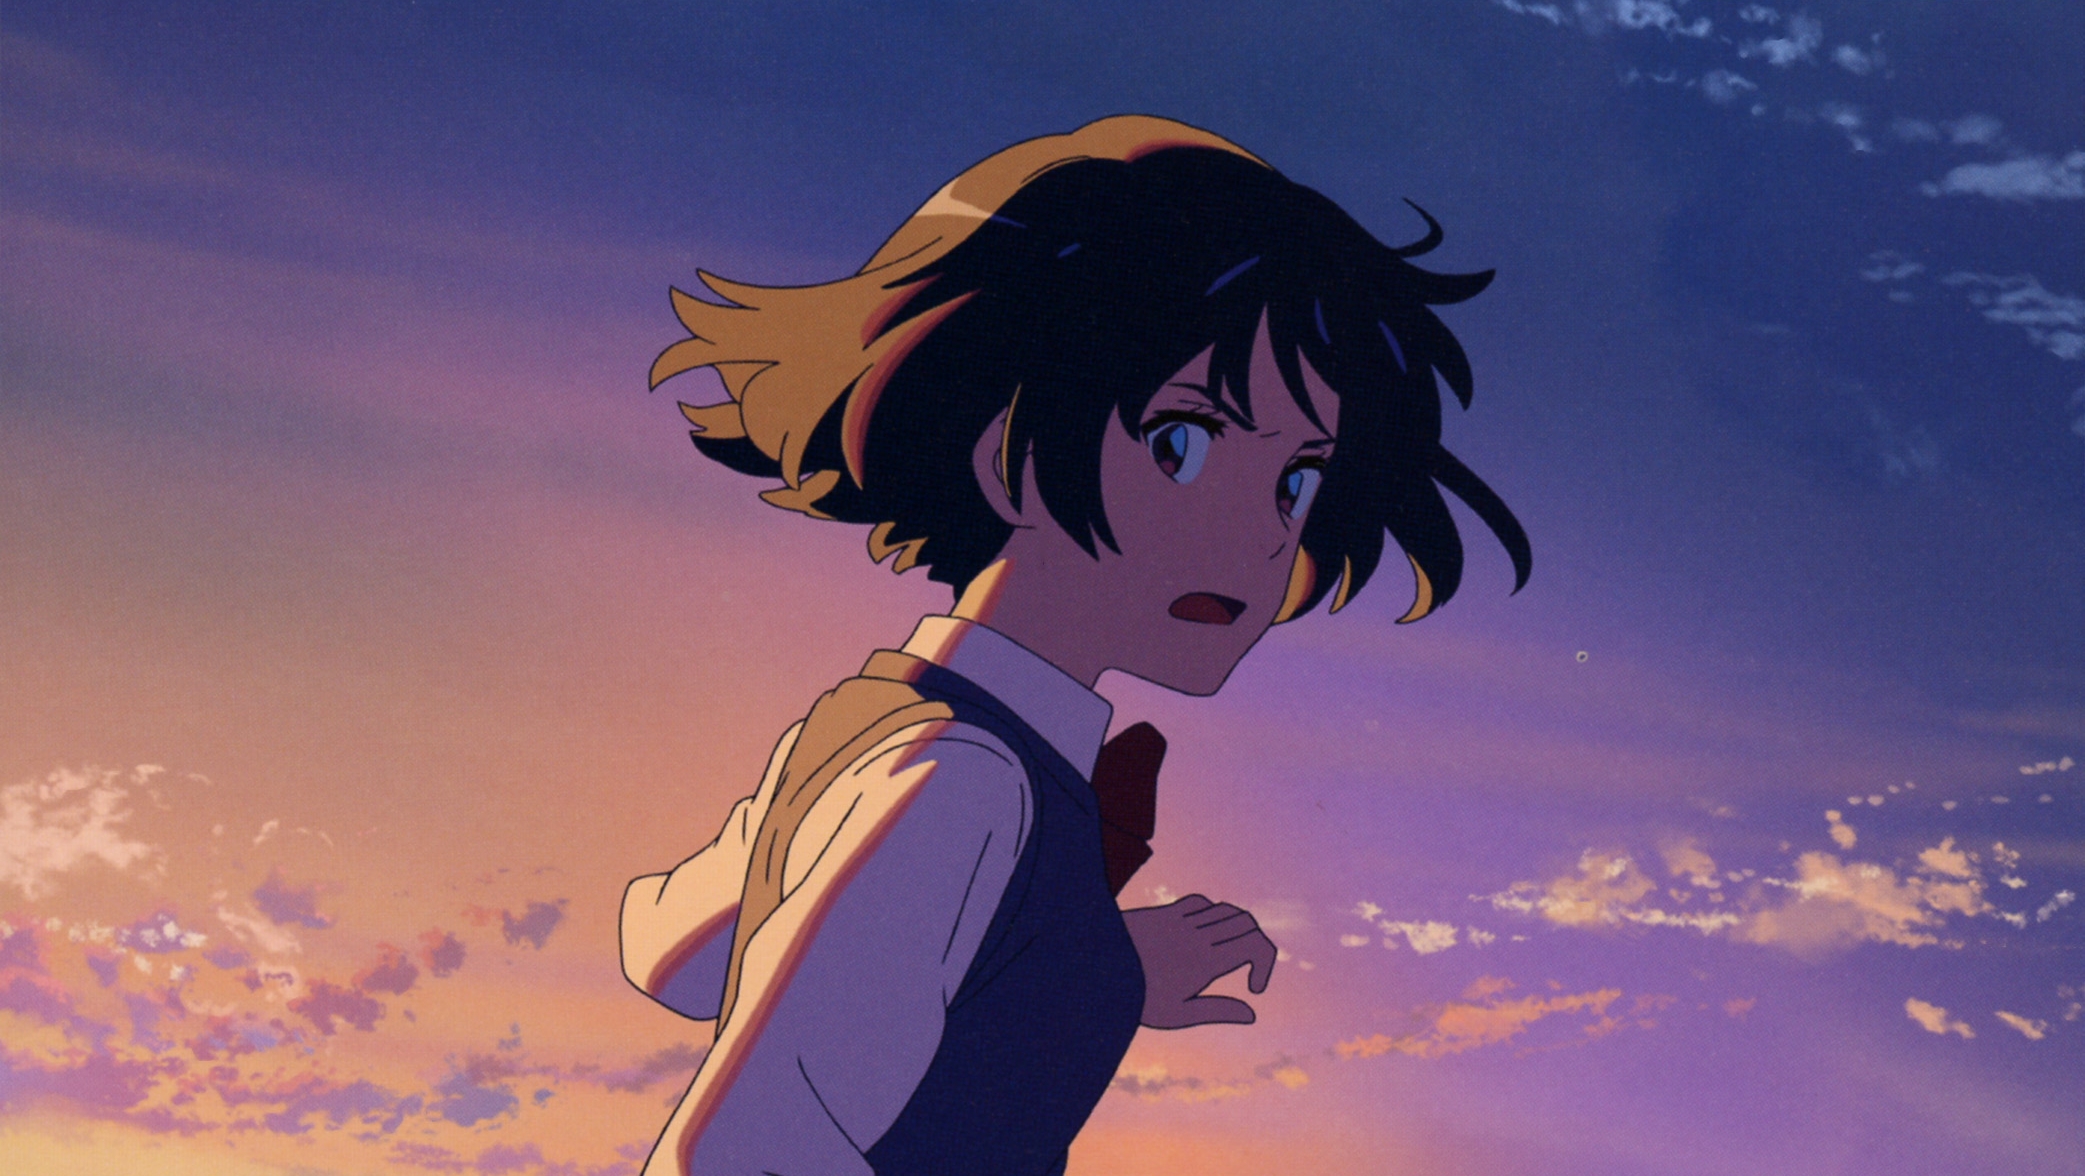 Art of Your Name